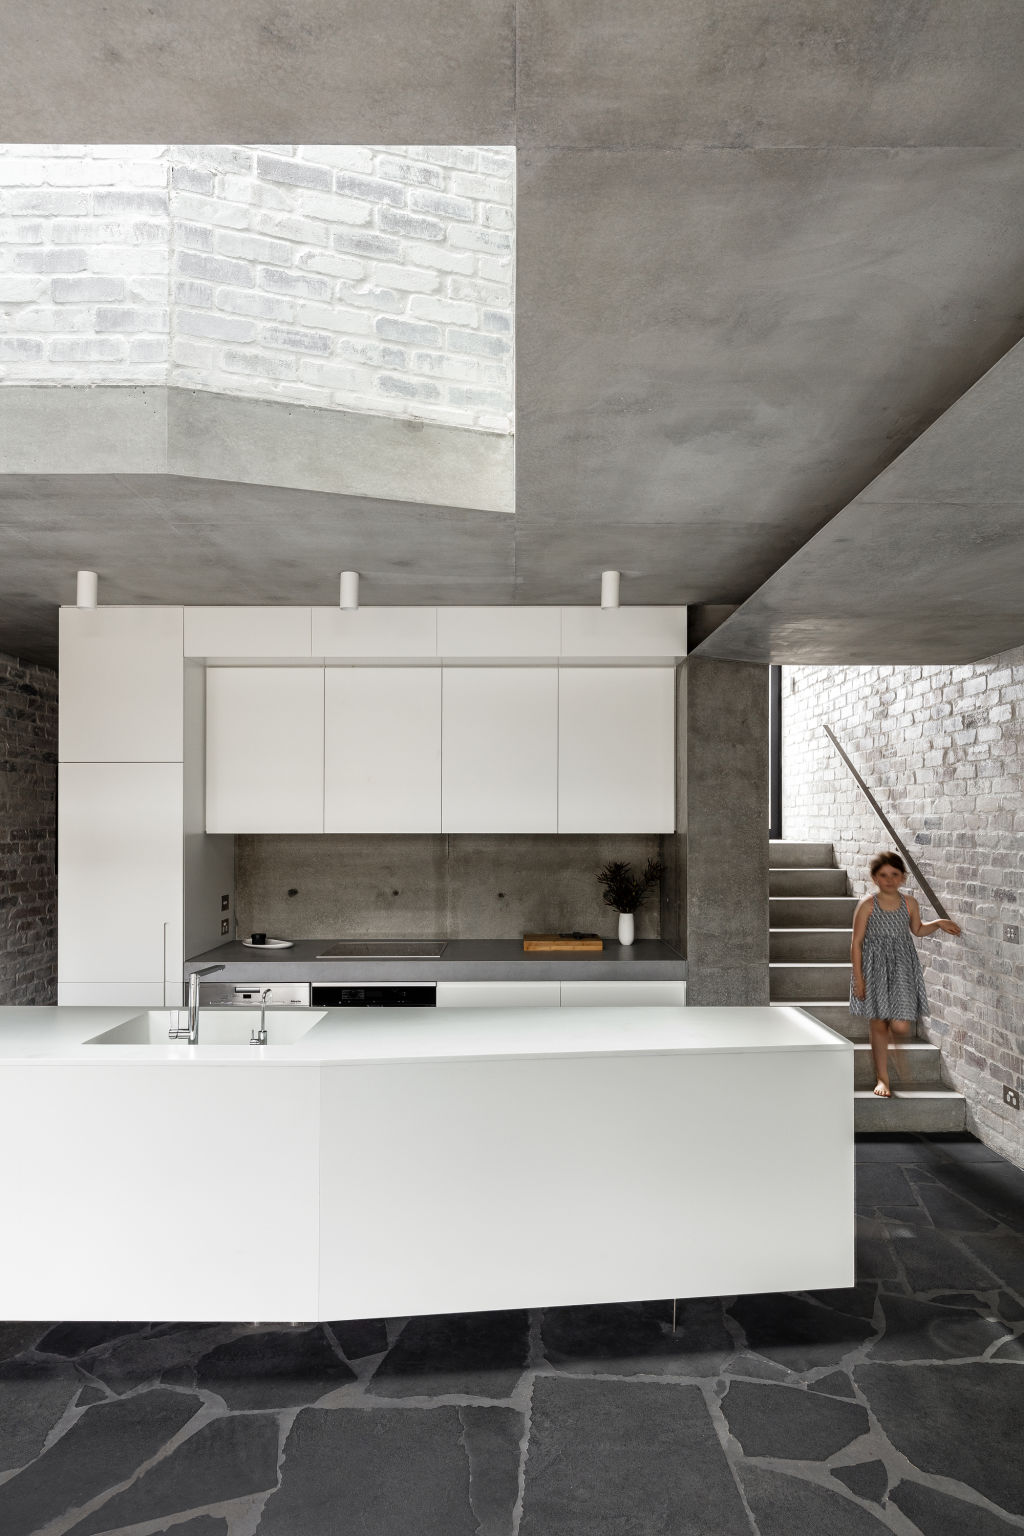 The void above the kitchen shows up the monotonal texture of the interiors. Photo: Tom Ferguson